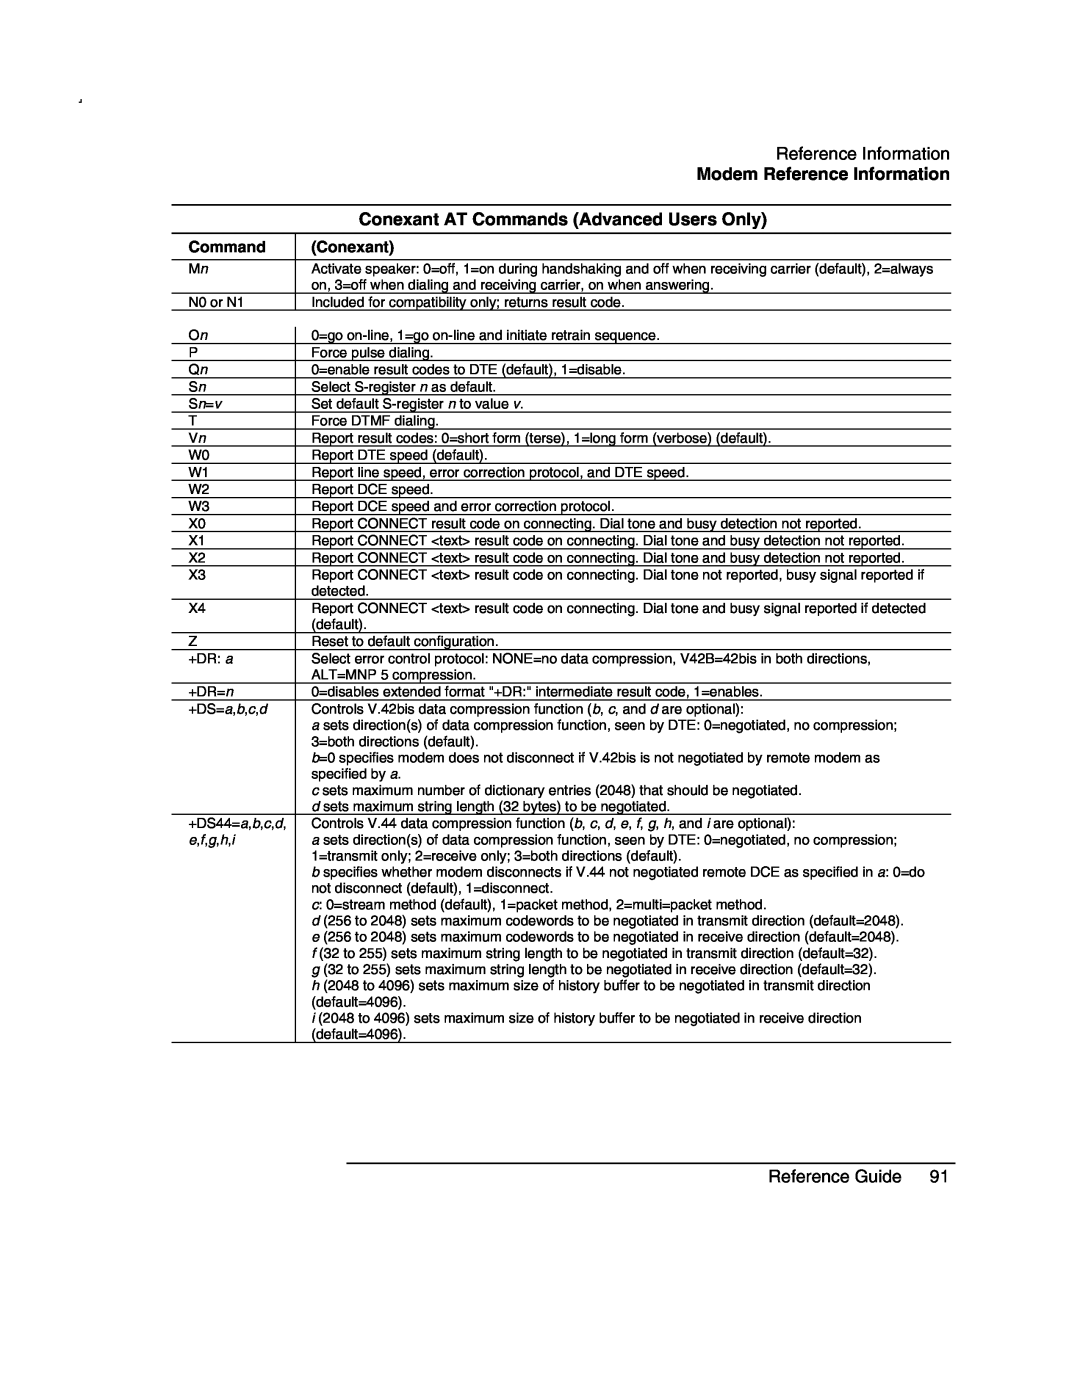 Compaq AMC20493-KT5 Modem Reference Information, Conexant AT Commands Advanced Users Only, Reference Guide, e,f,g,h,i 